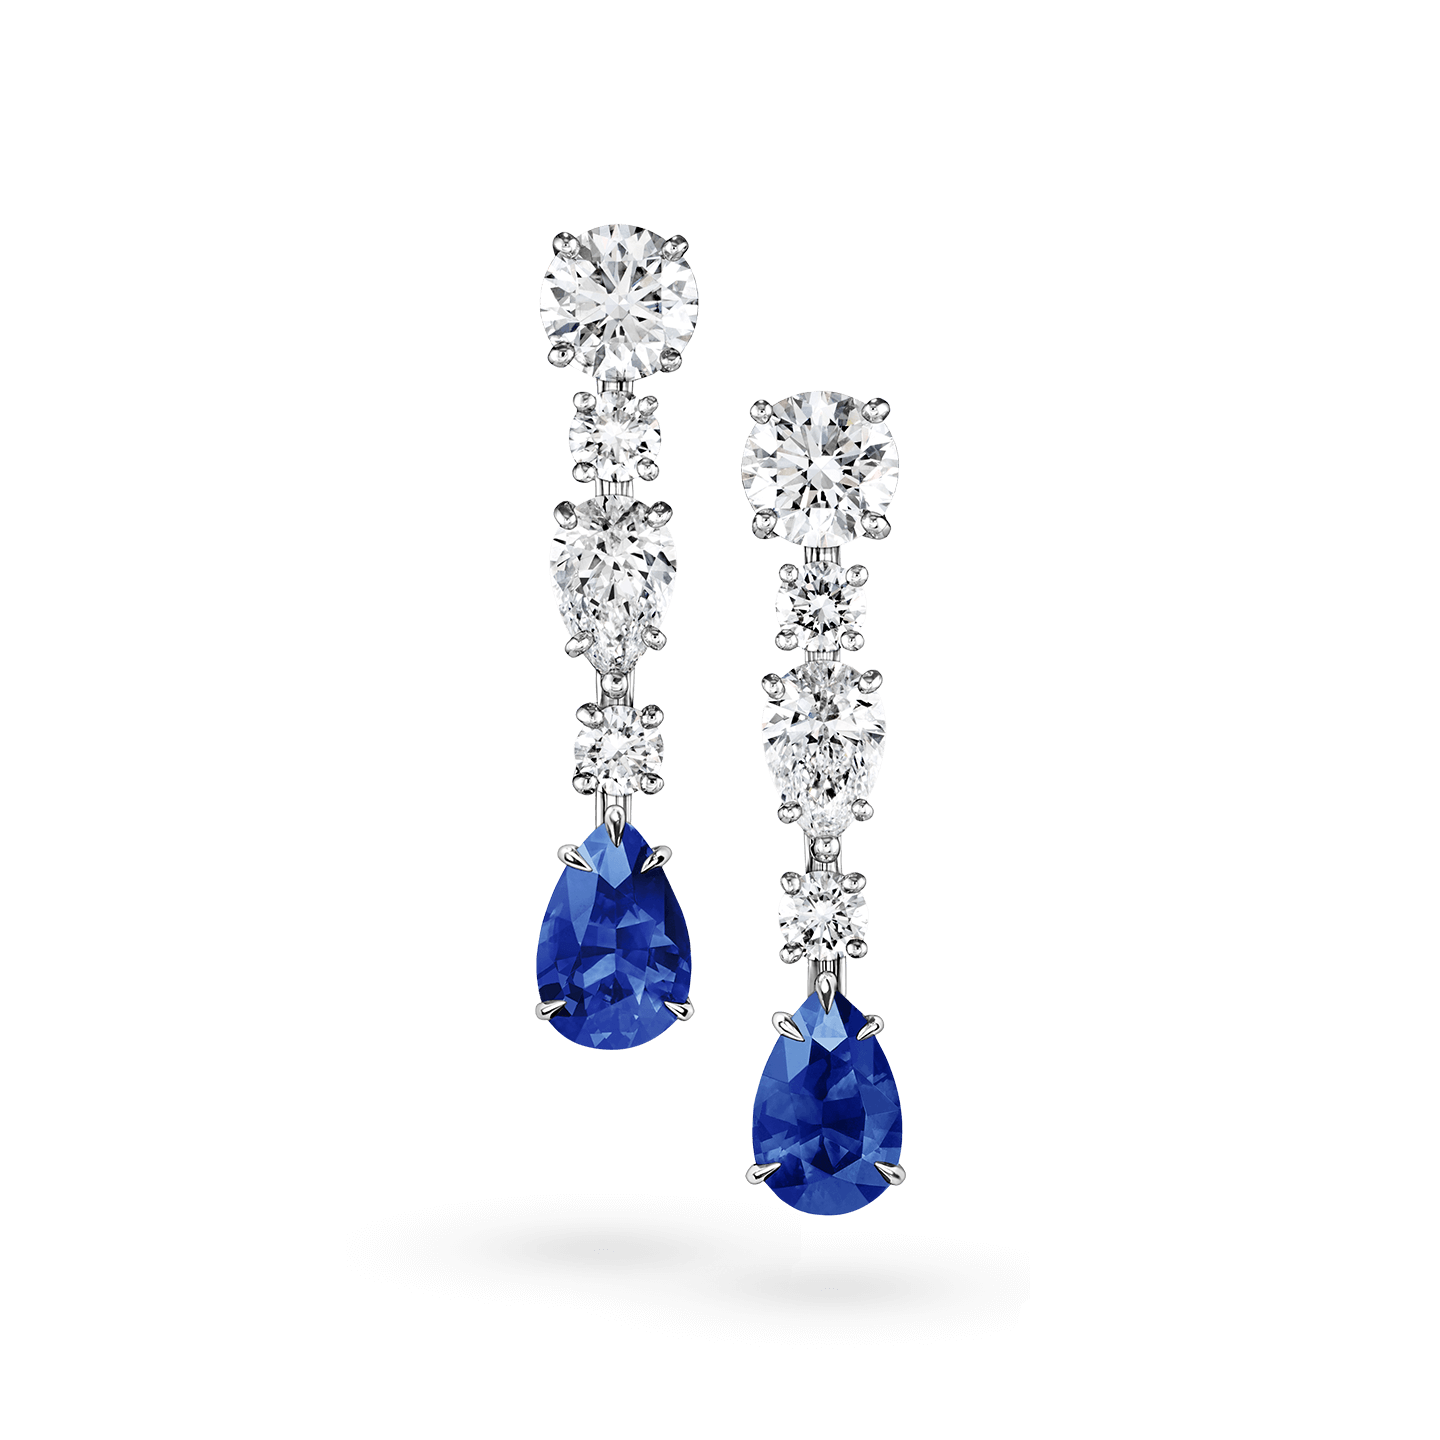 Diamond and Sapphire Drop Earrings, Product Image 1